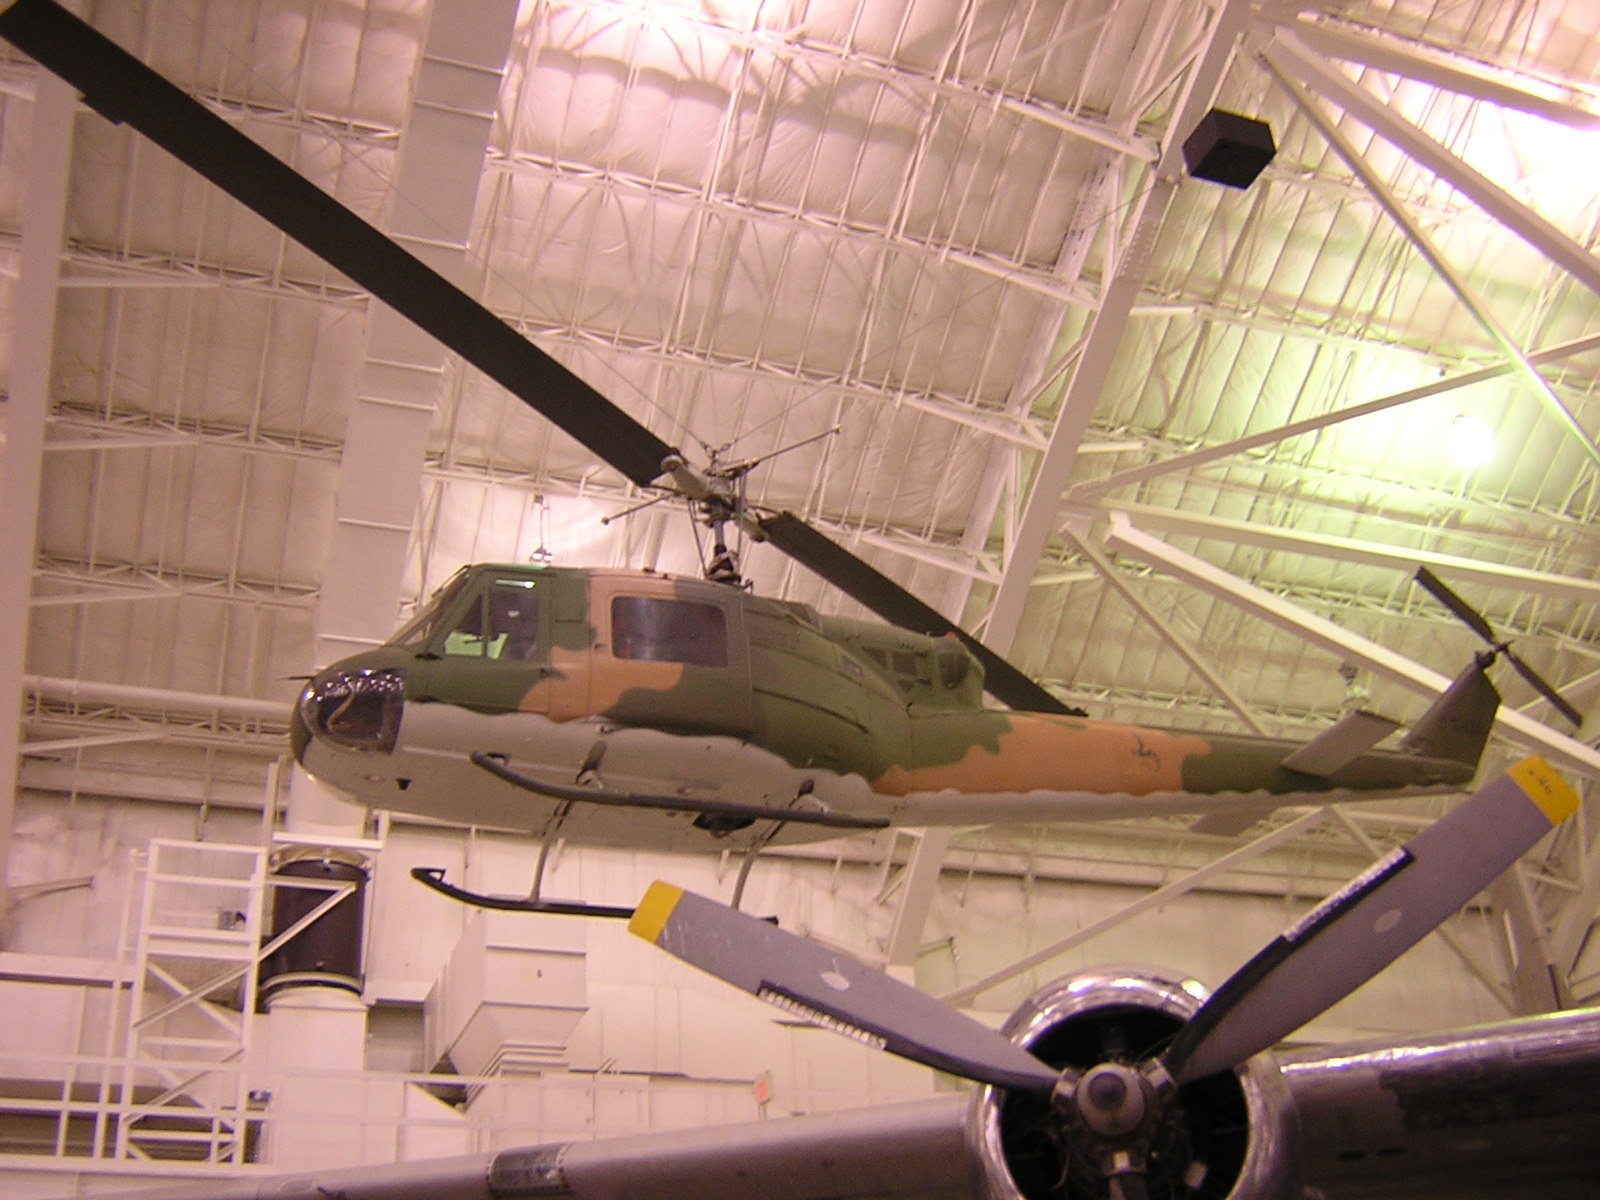 a small military helicopter is on display in a hanger